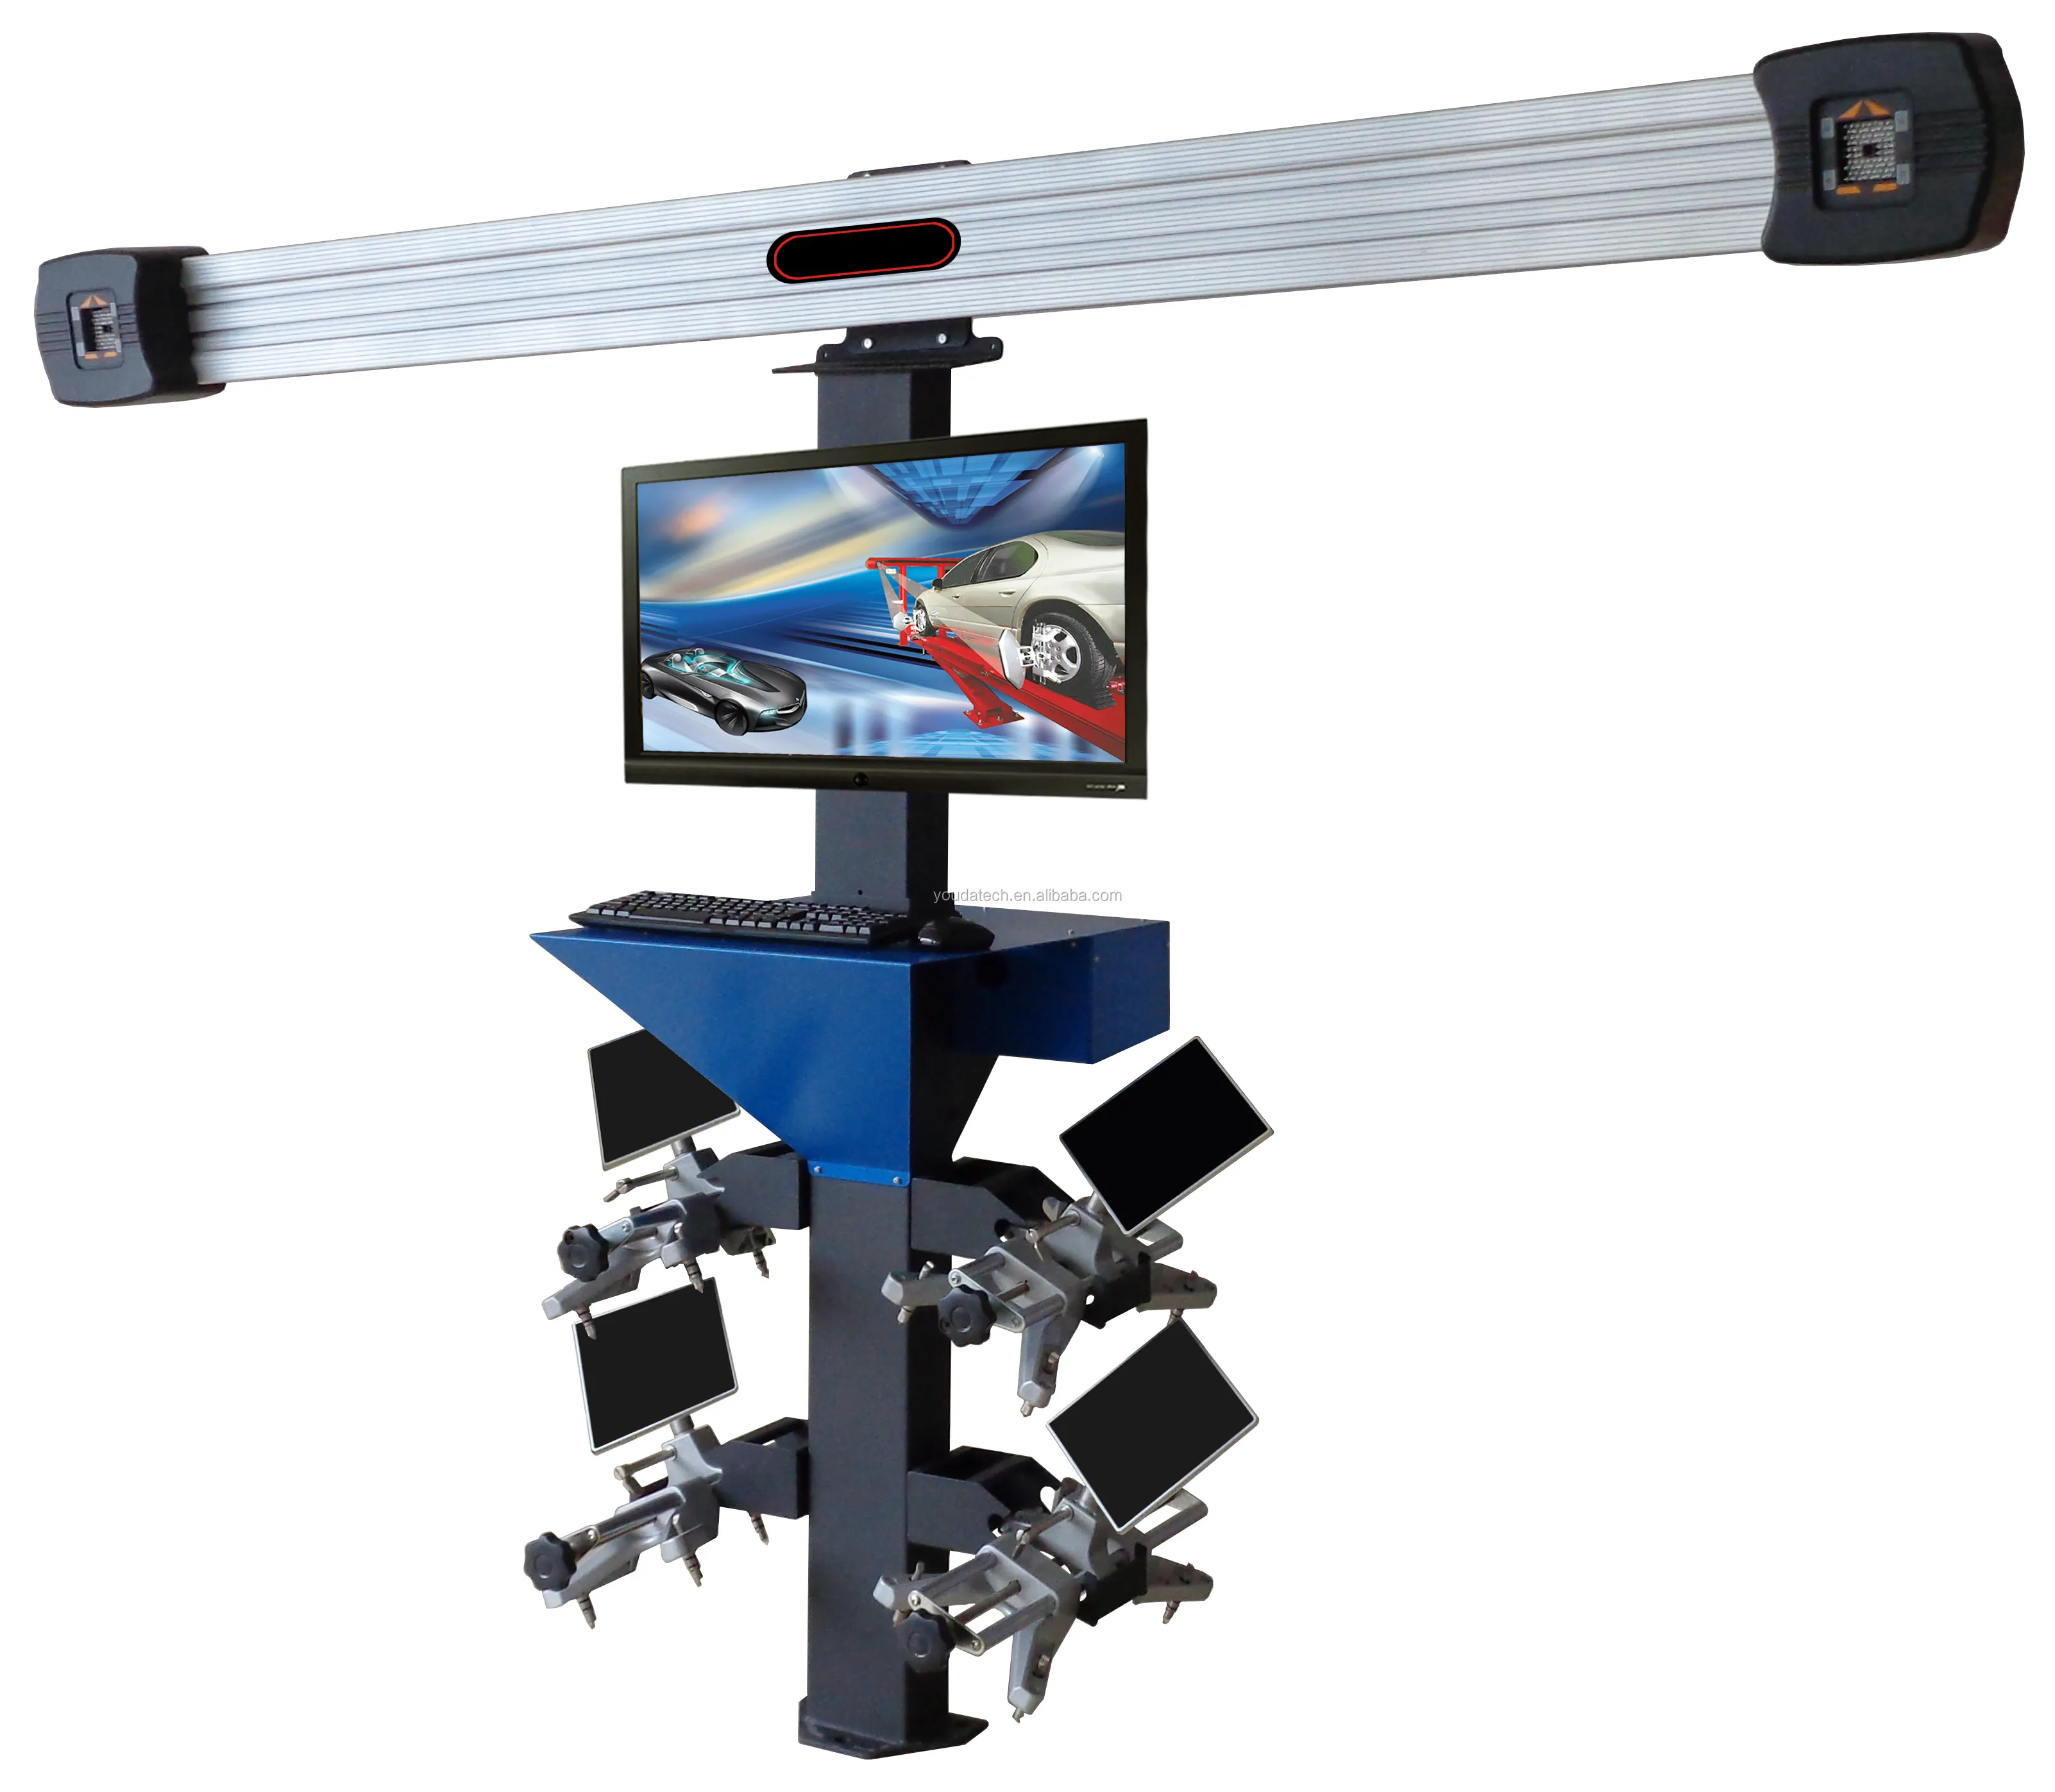 High quality wheel alignment/wheel balancing and alignment equipment